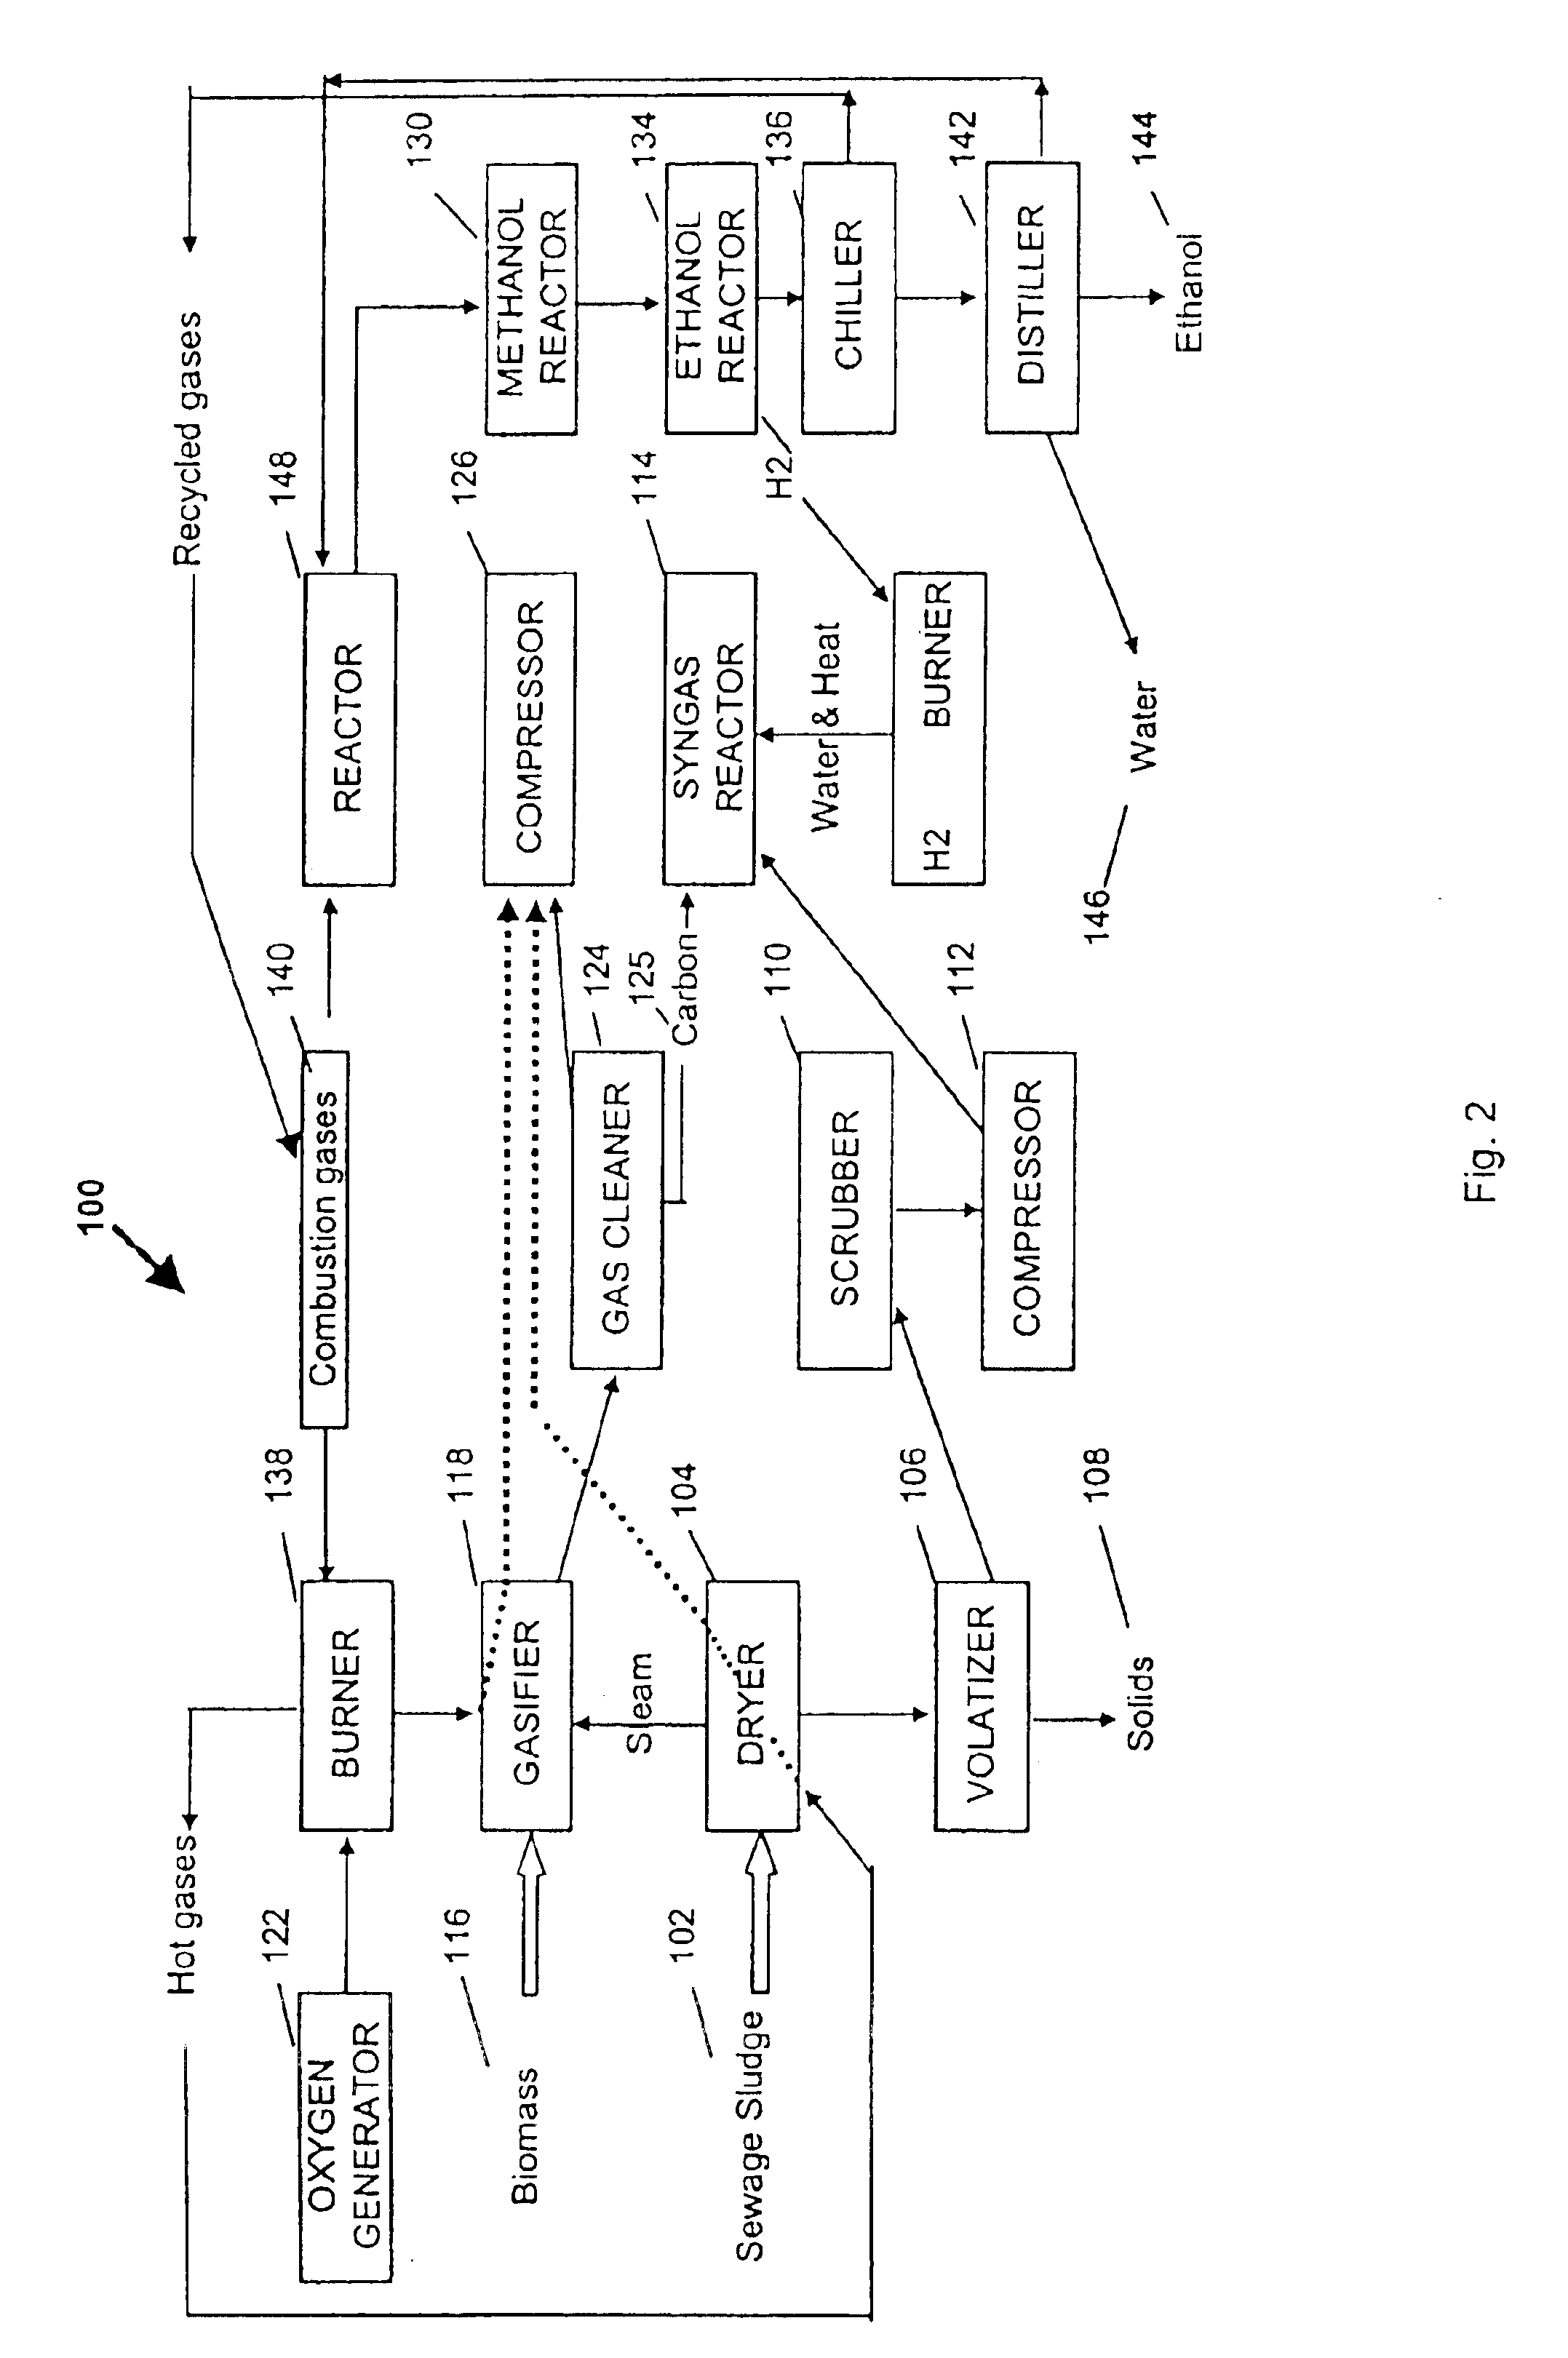 Process for producing saleable liquids from organic material